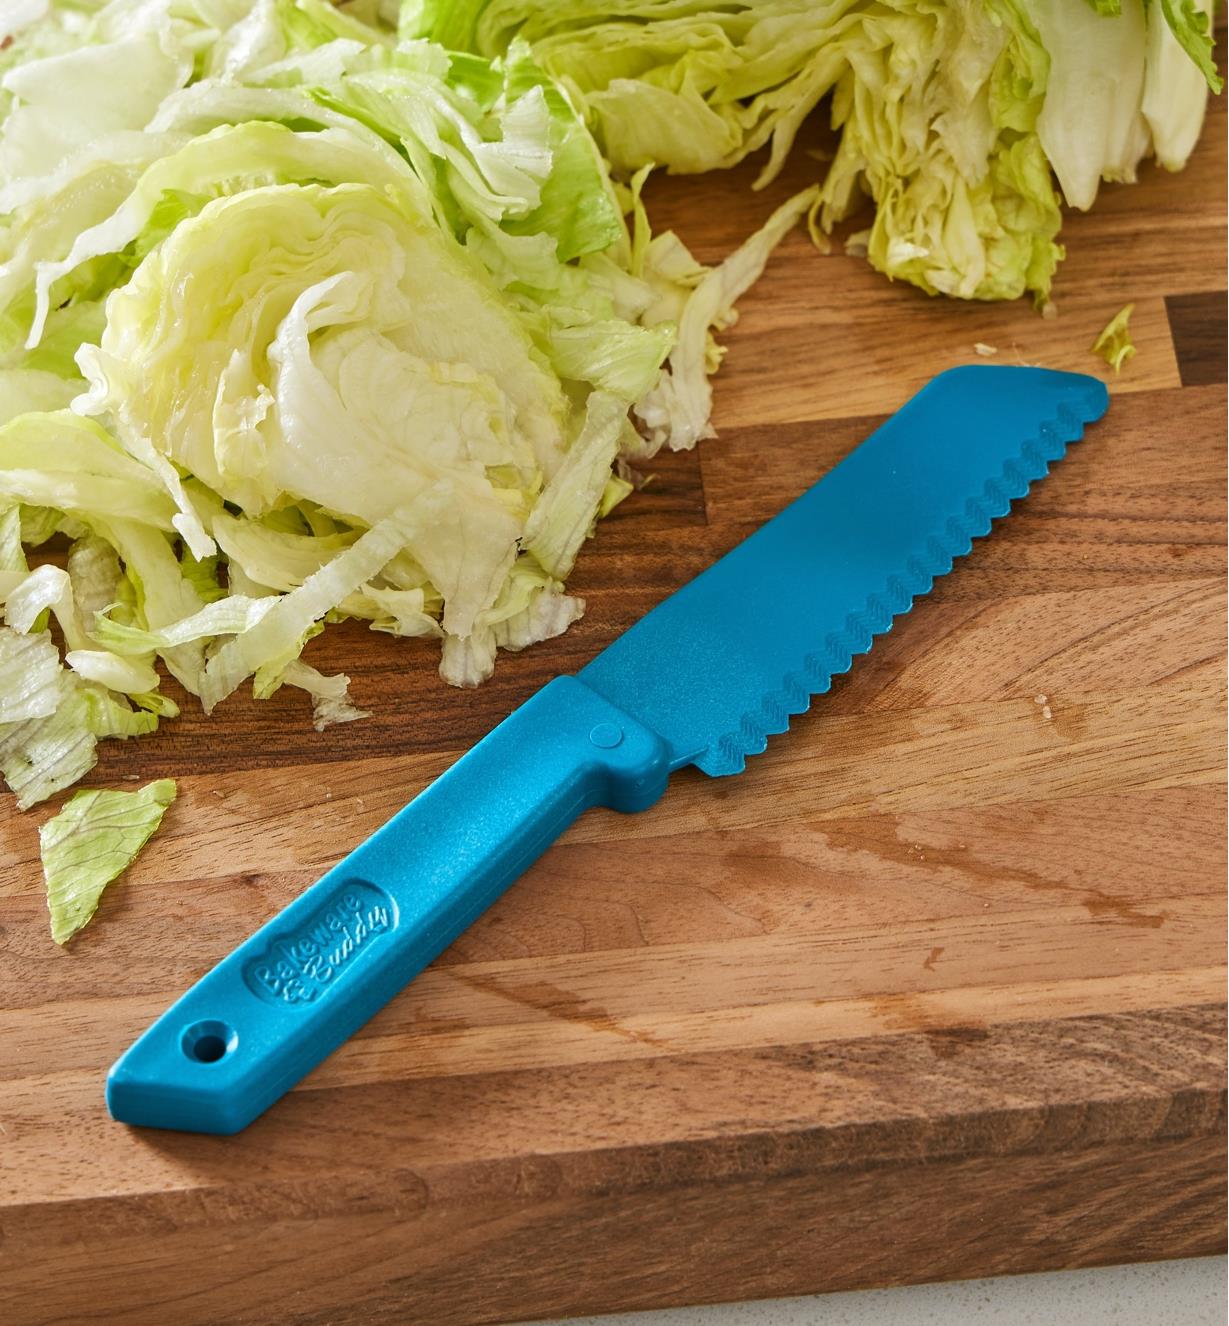 The bakeware buddy knife resting on a cutting board